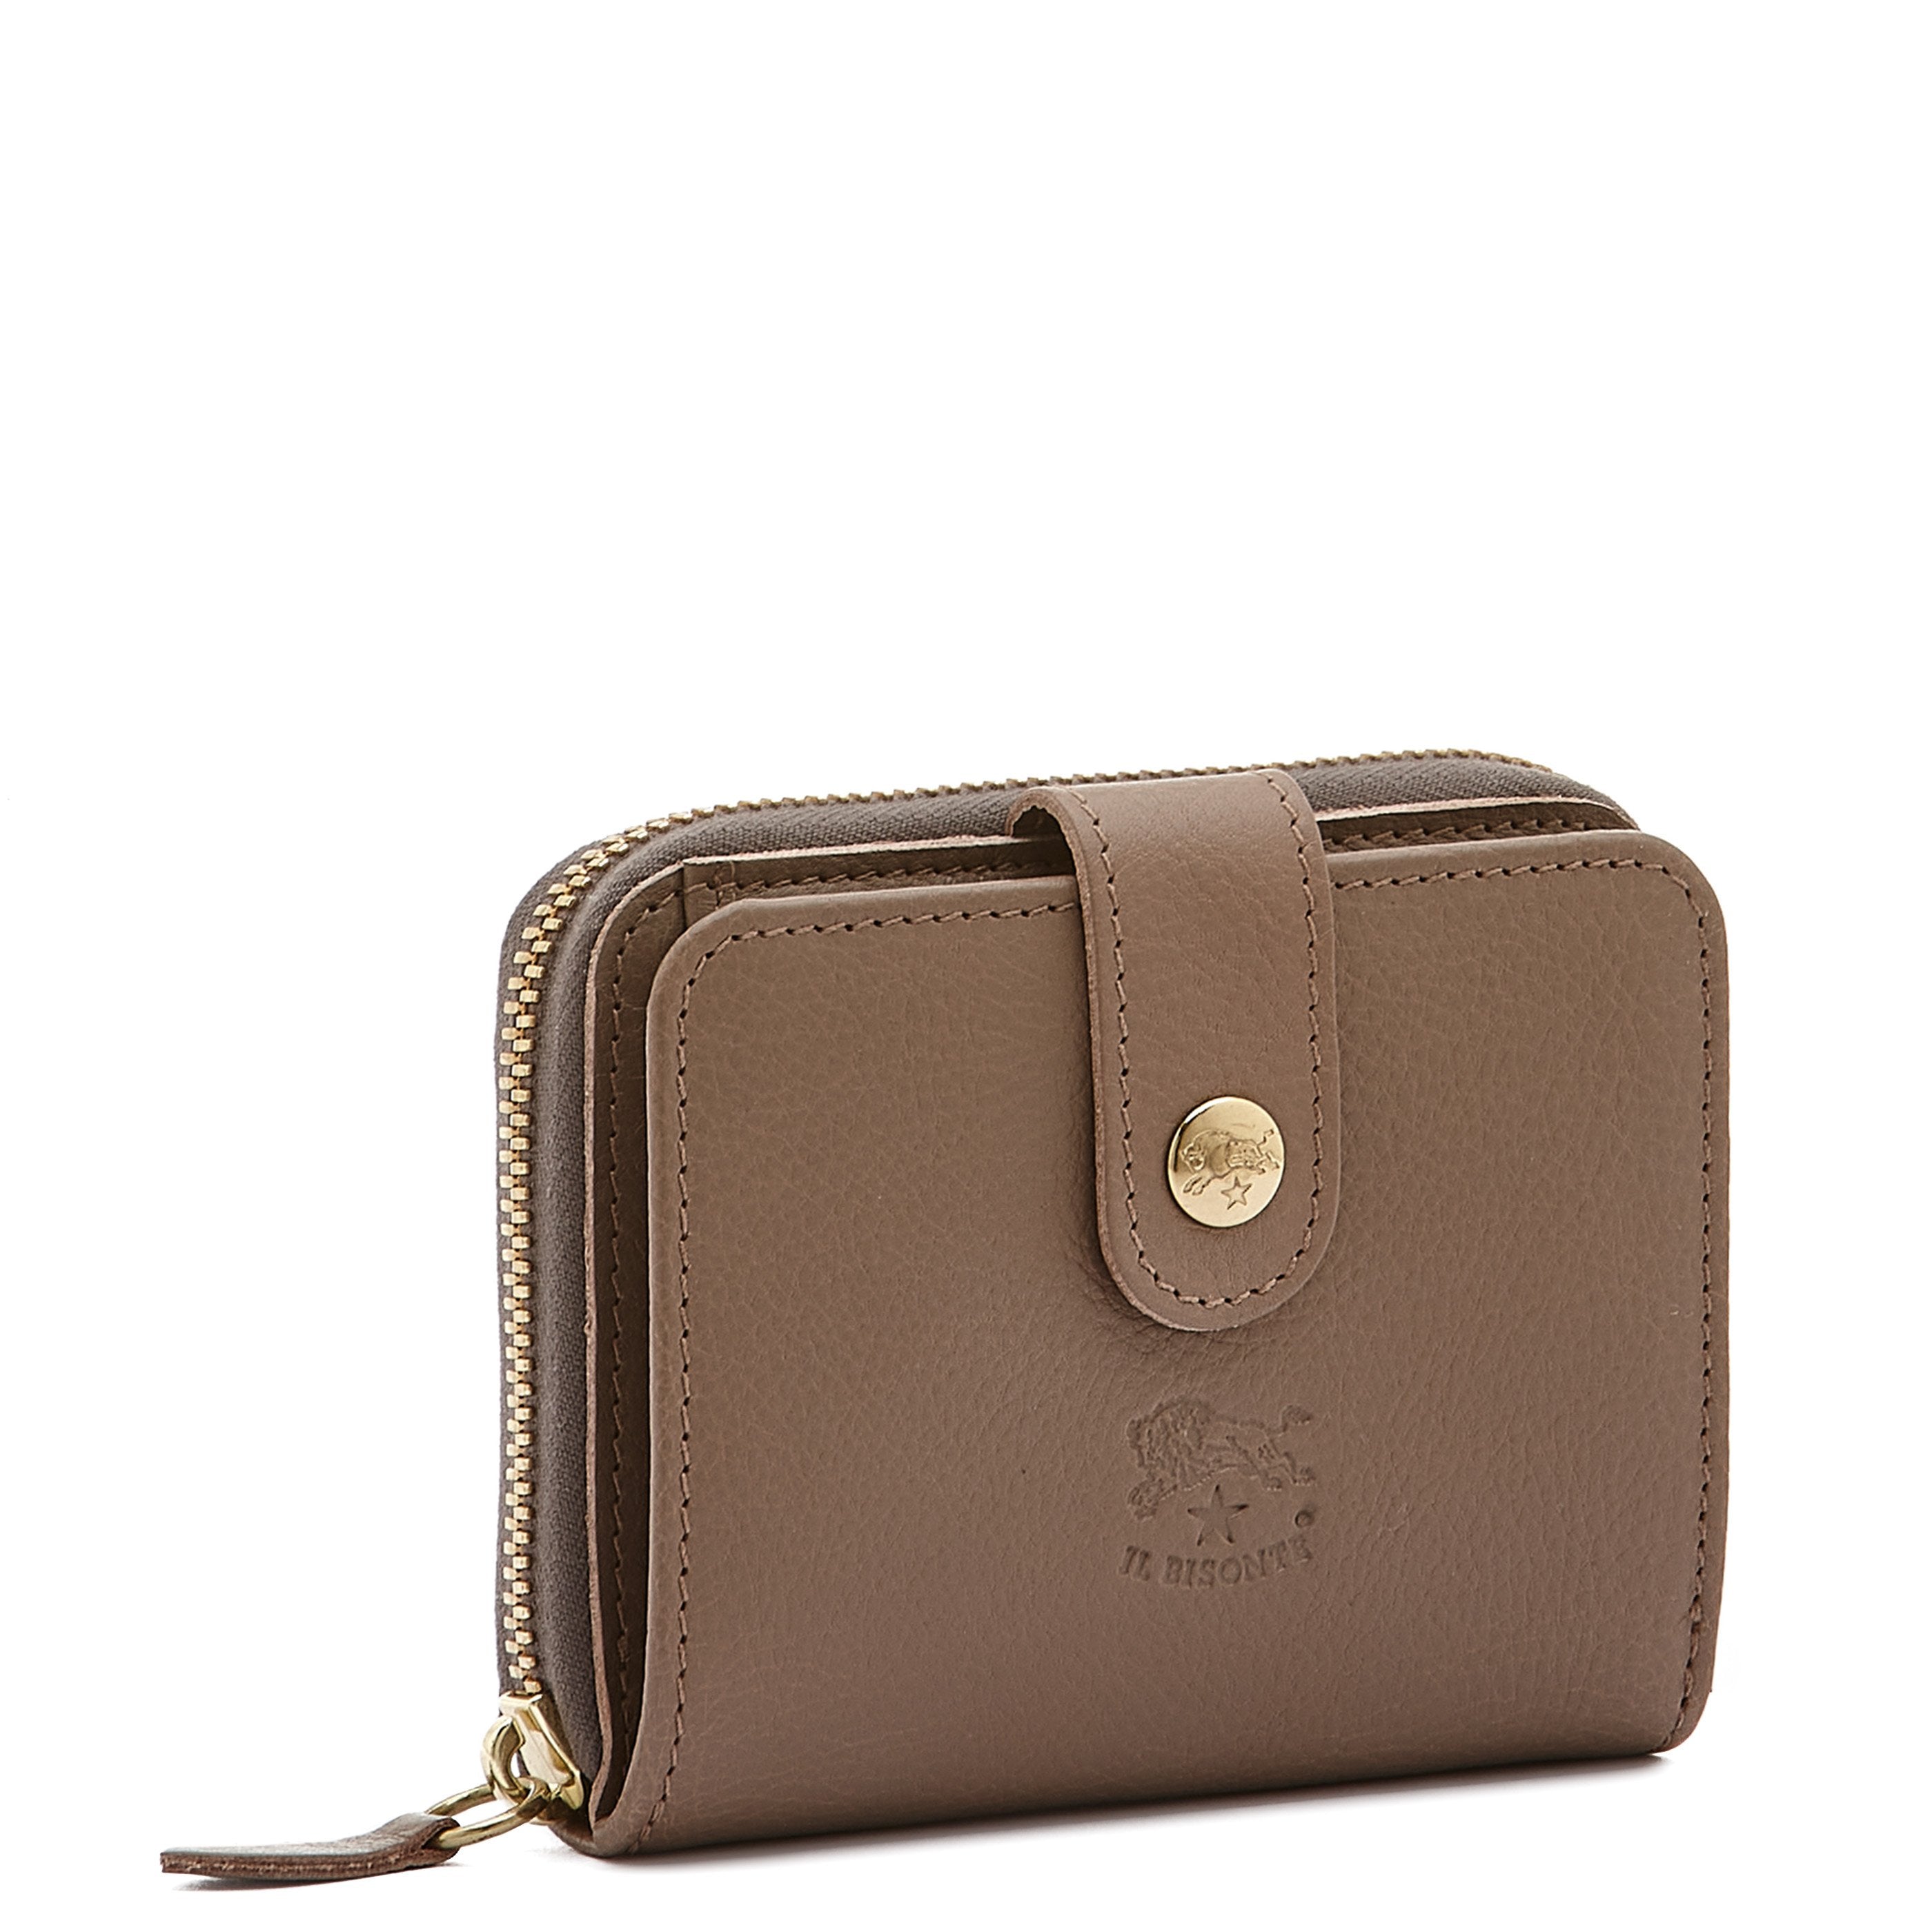 Women's wallet in calf leather color light grey